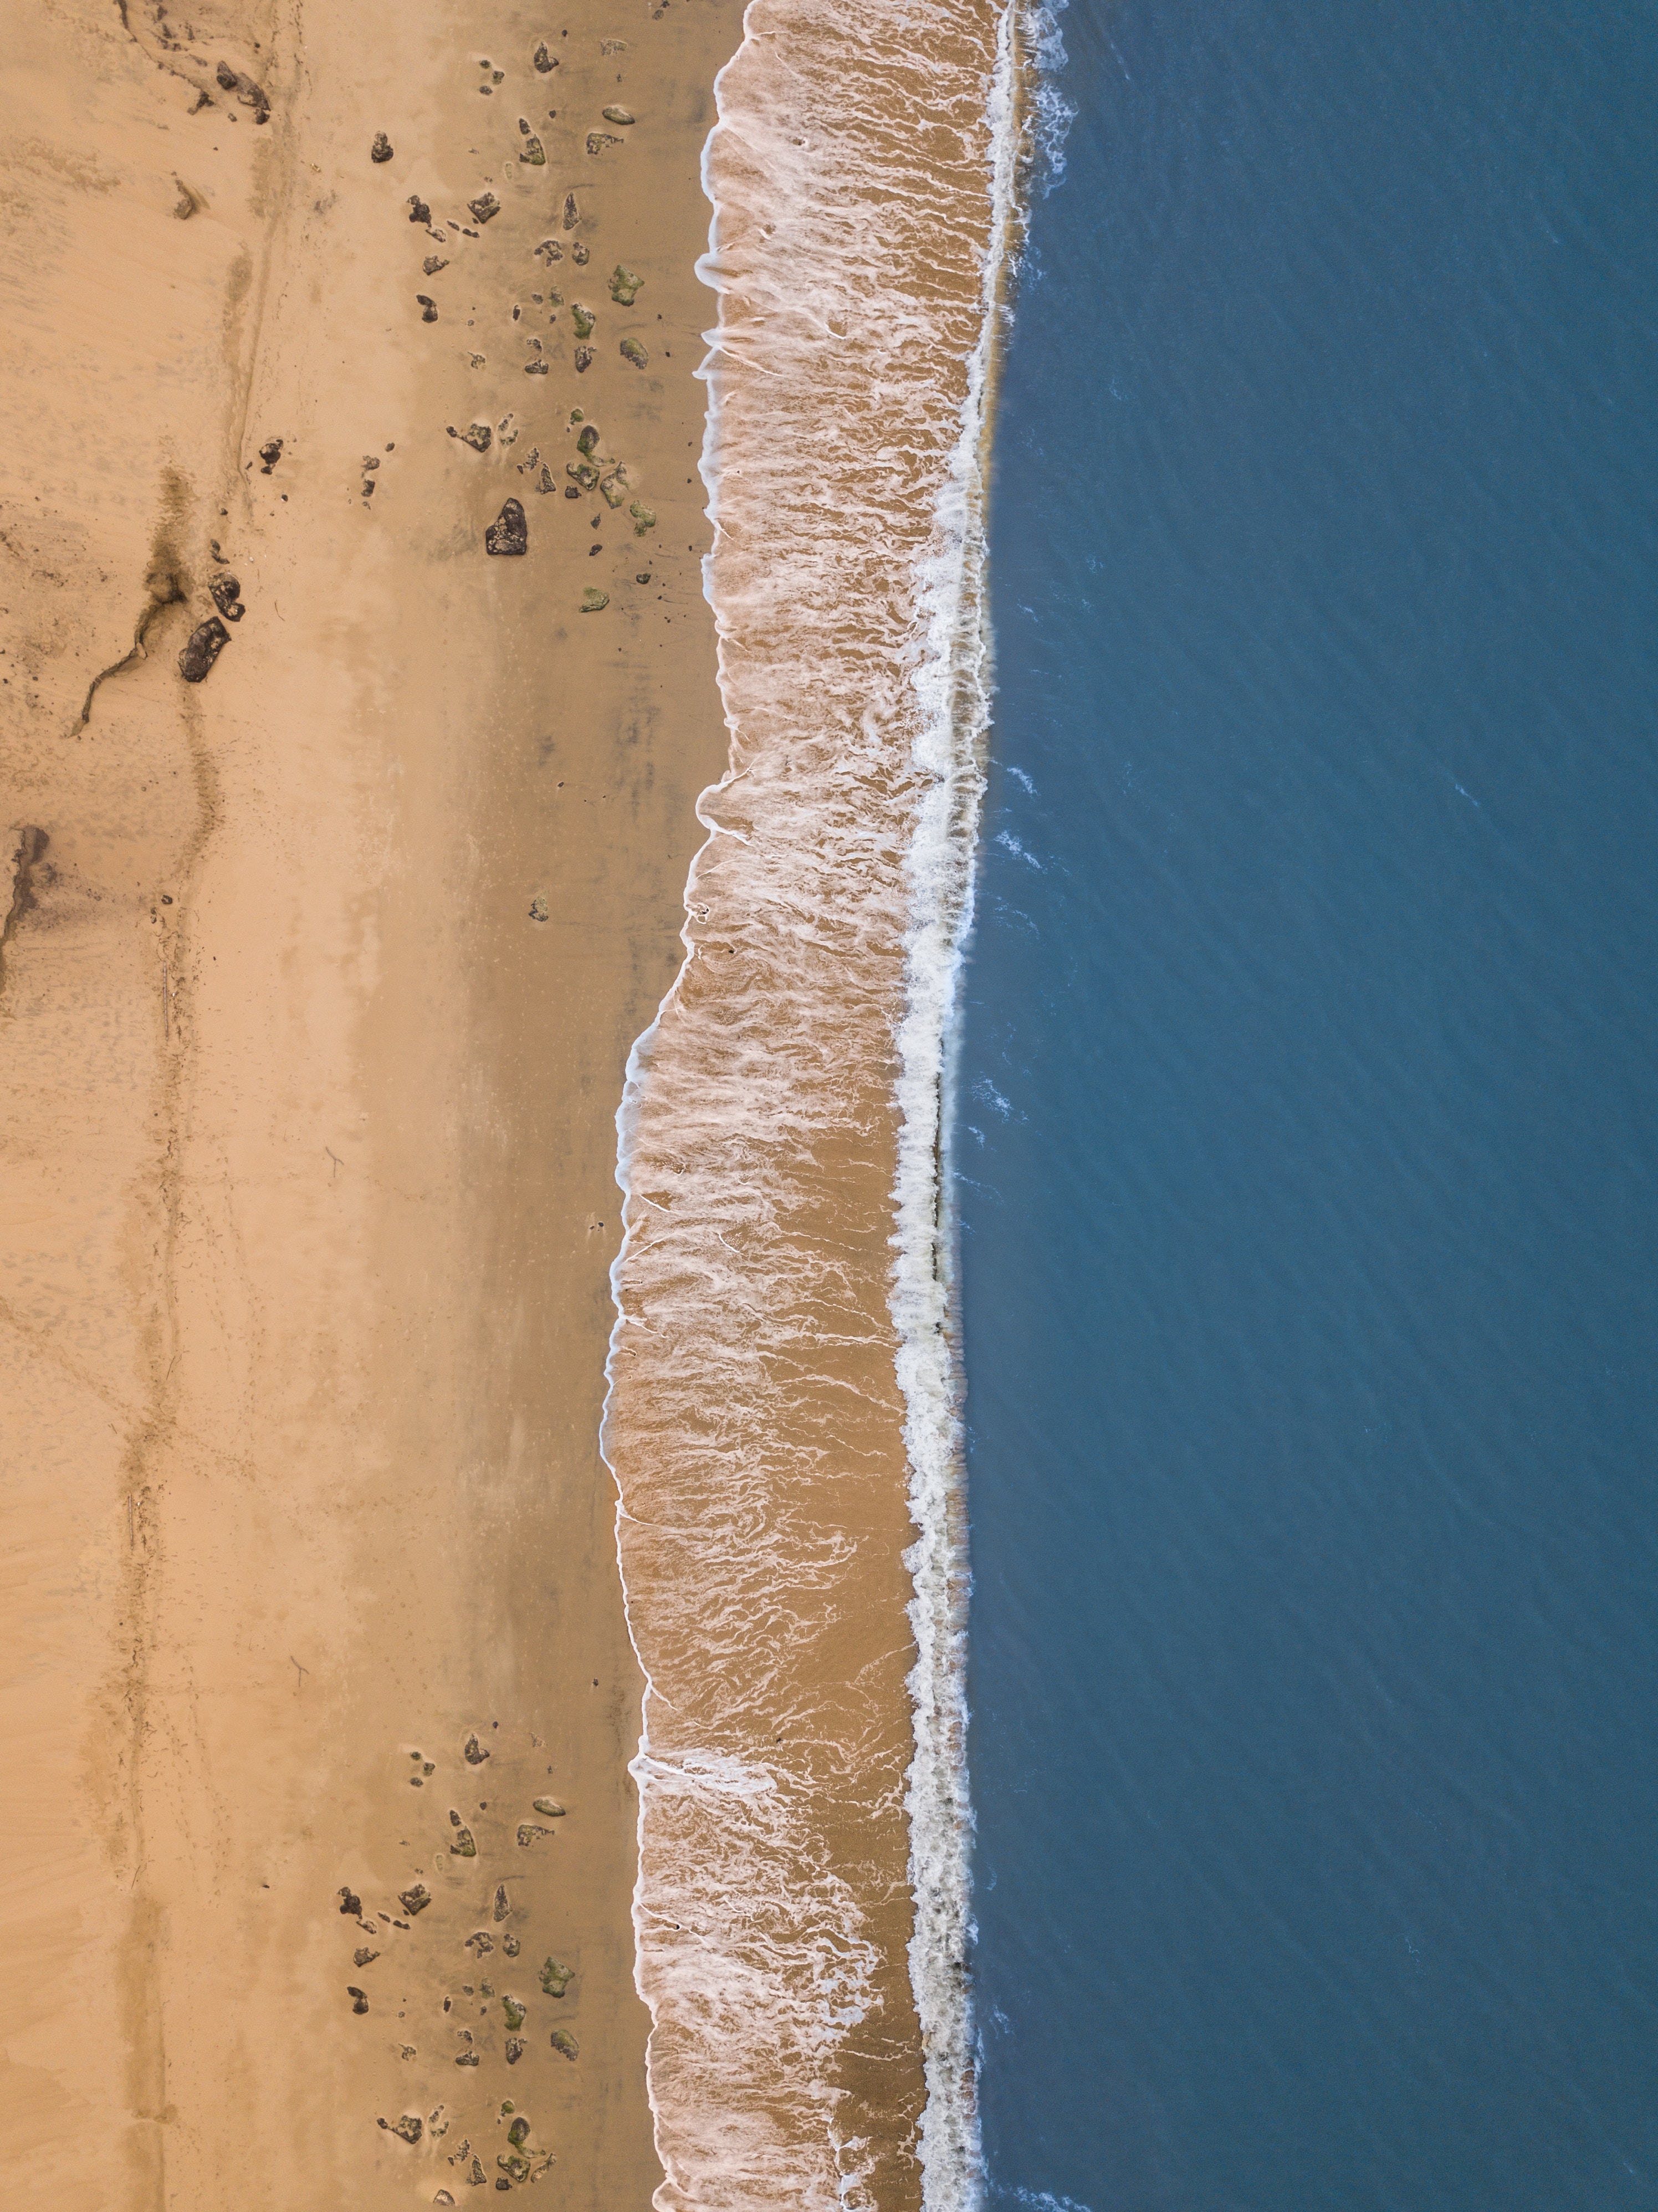 nature, sea, beach, sand, view from above, surf, wave 2160p